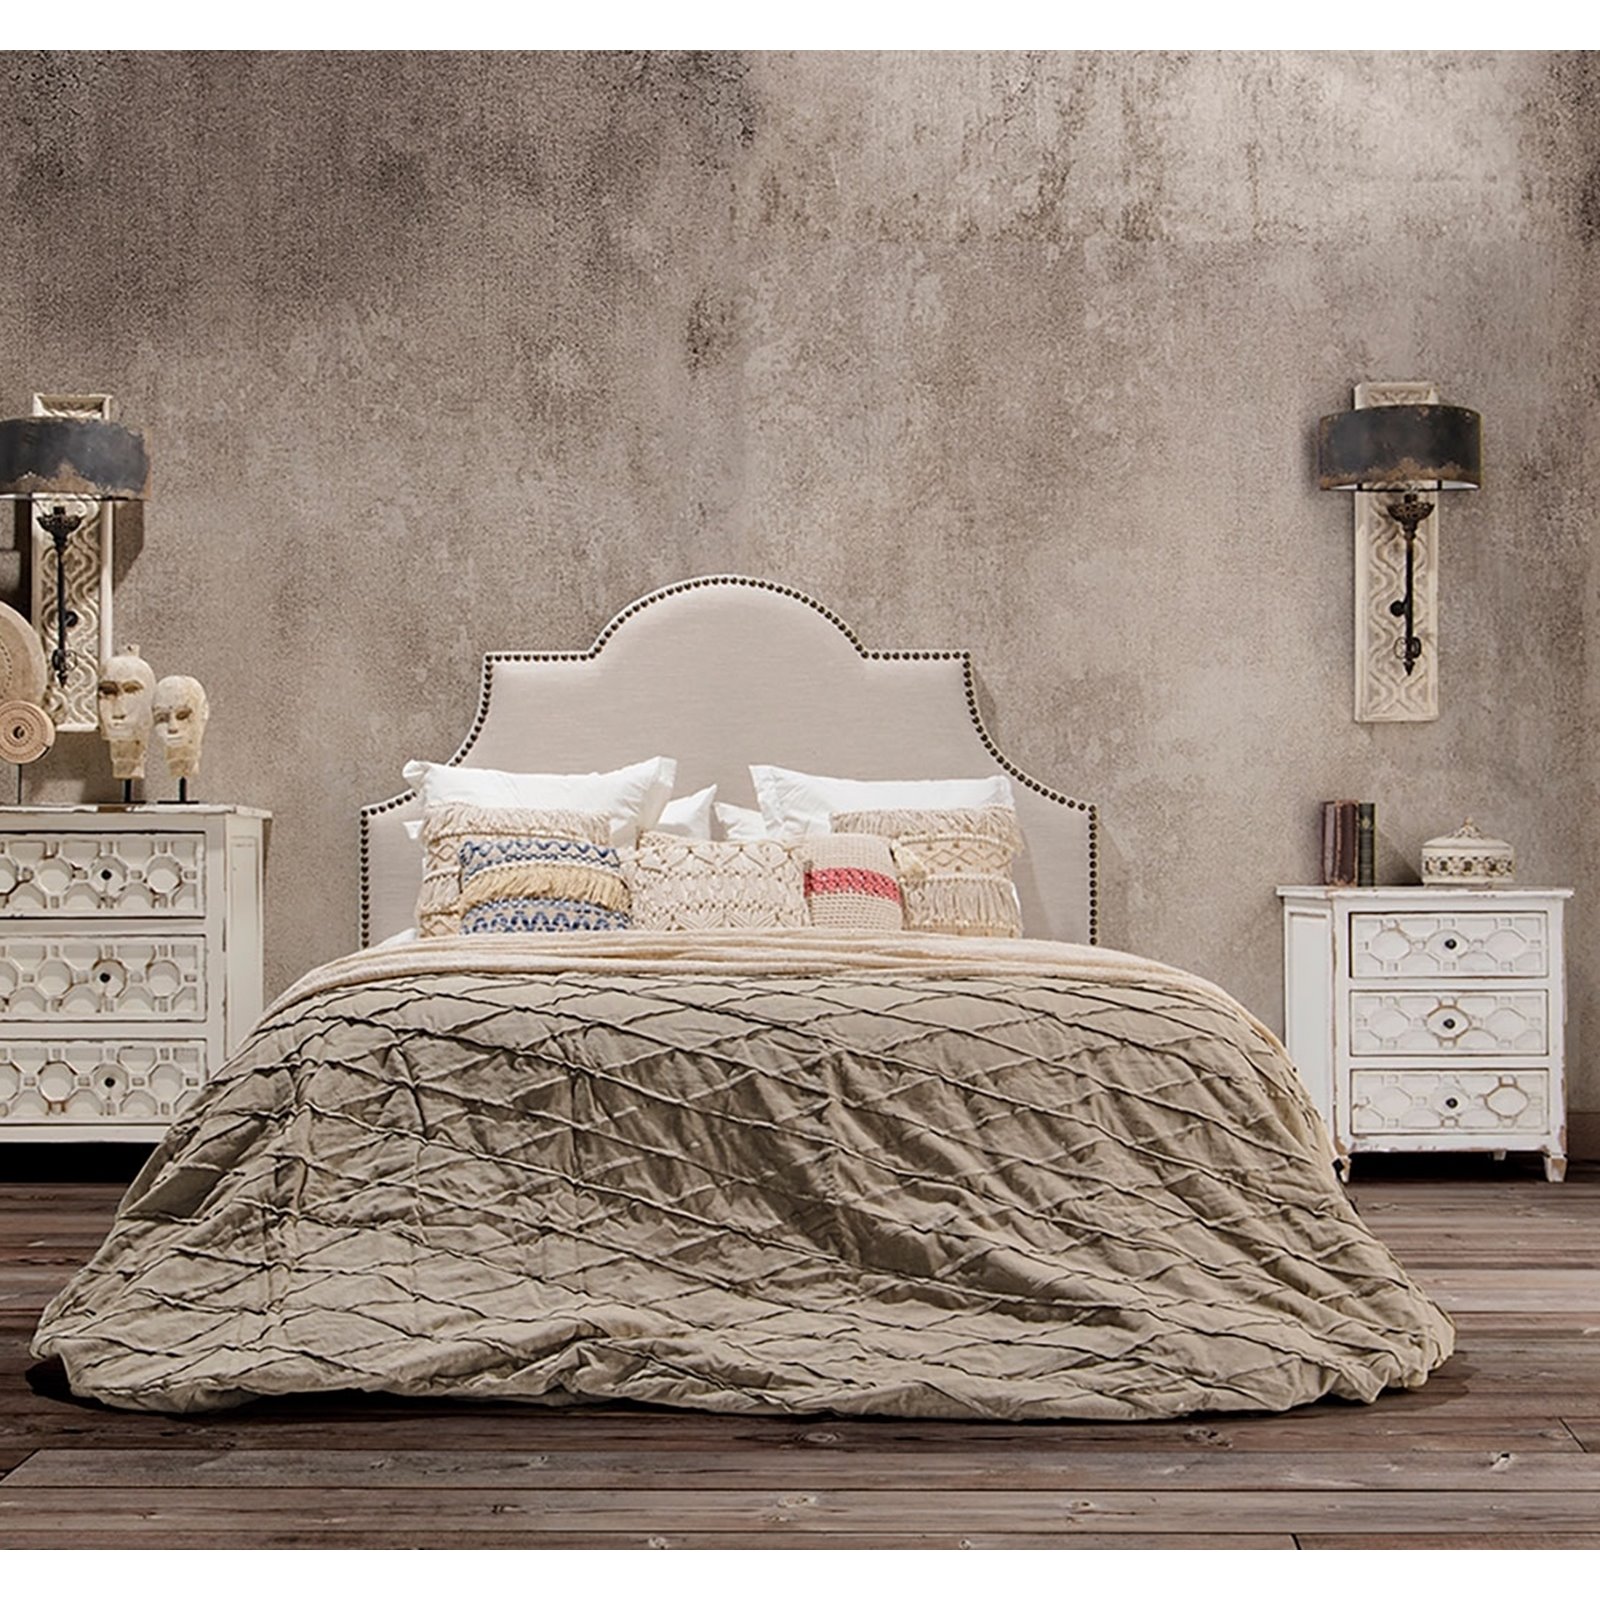 Cream Upholstered Arched Headboard - 160cm Image